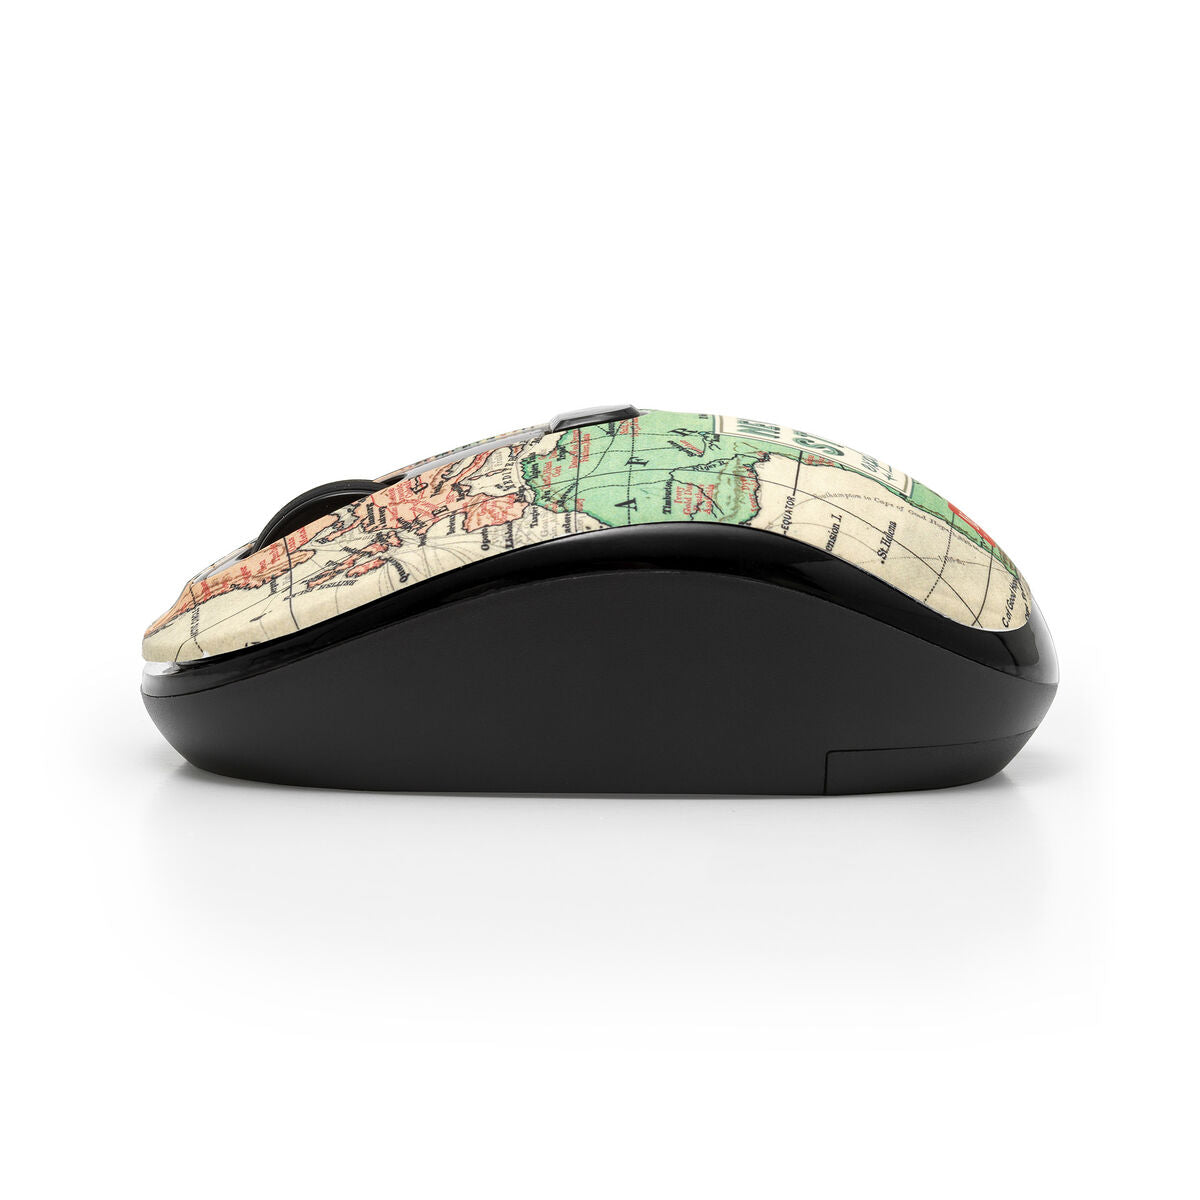 Mouse Wireless con Ricevitore USB travel